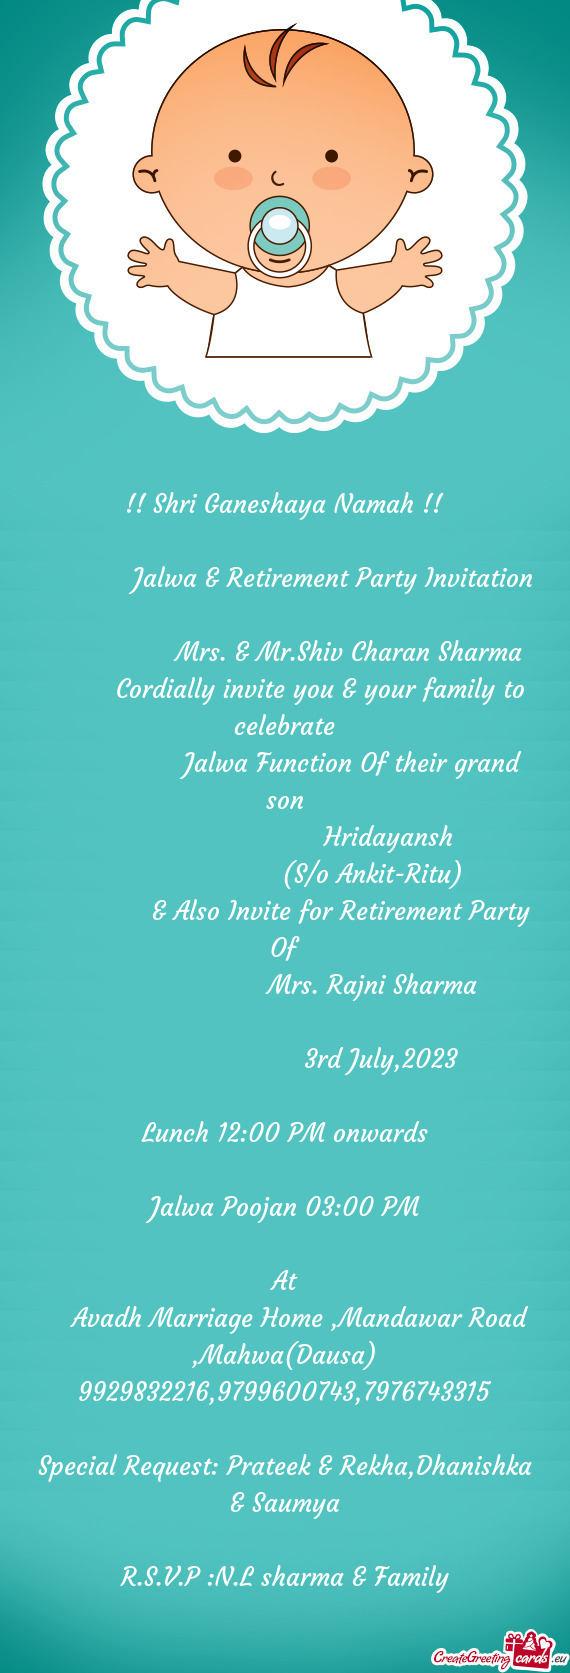 Cordially invite you & your family to celebrate